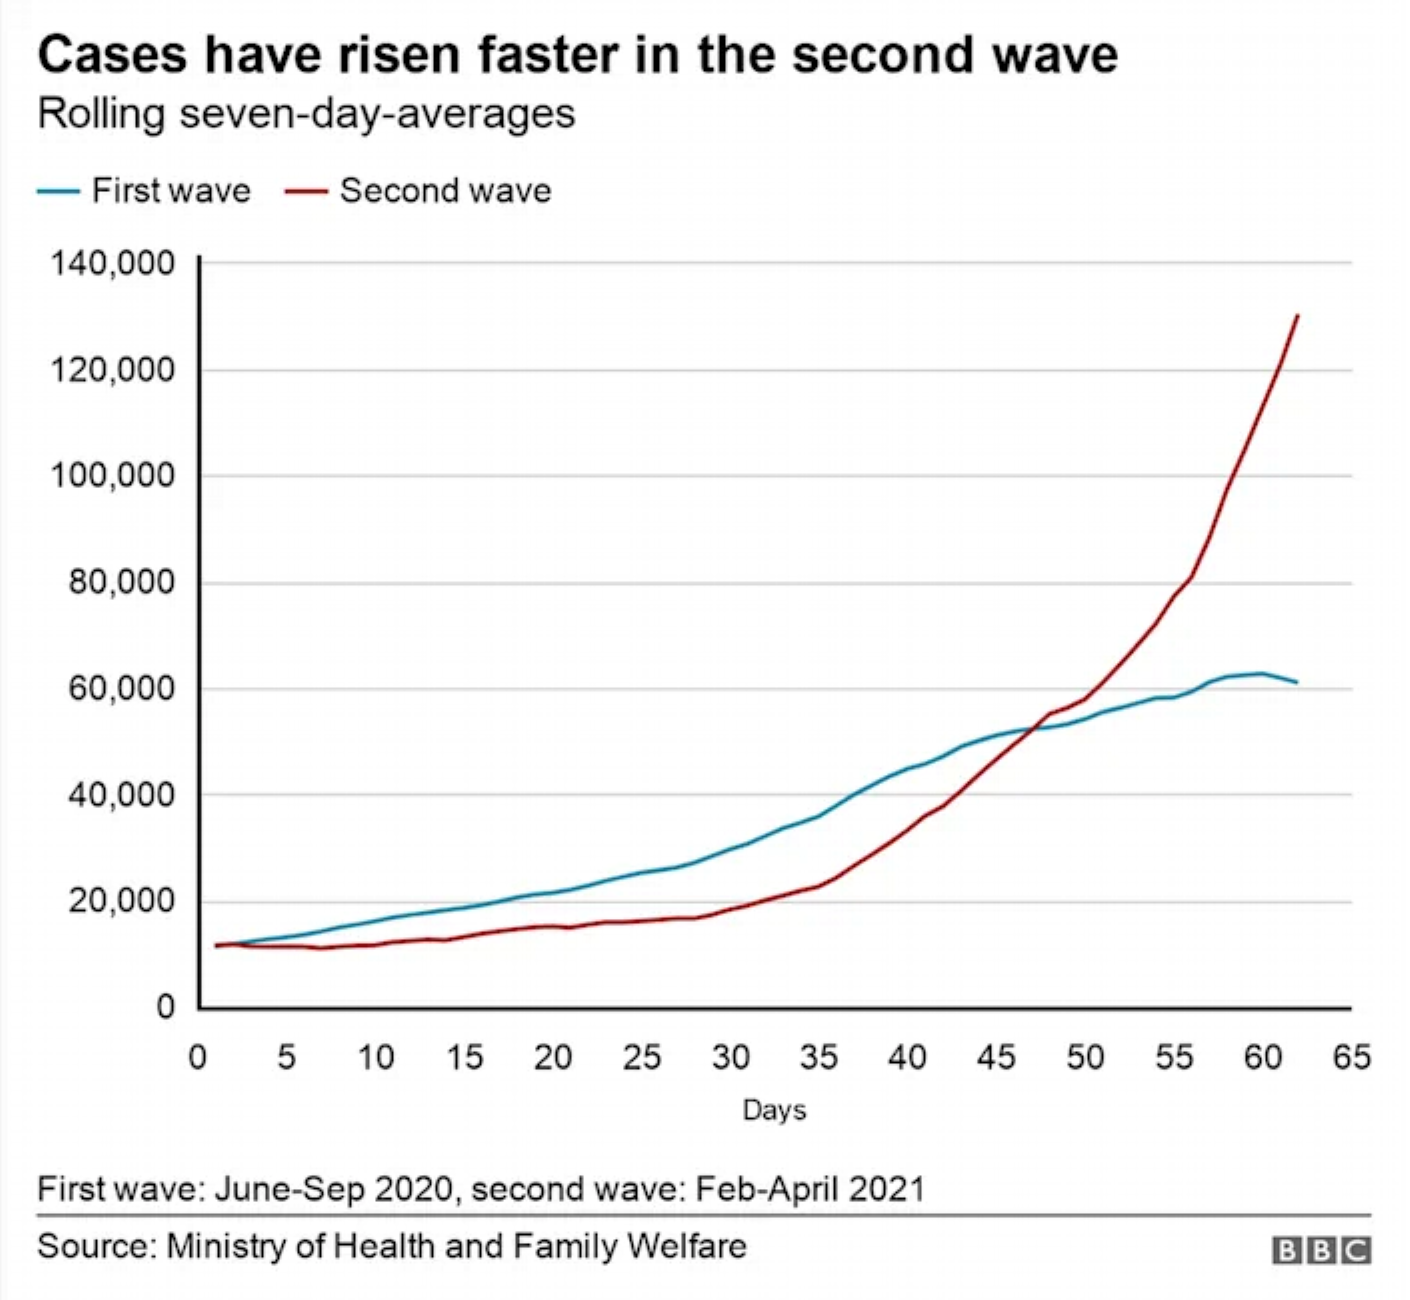 Covid-19 cases in India during the first and second waves, June-Sep 2020 and Feb-Apr 2021. Data: India Ministry of Health and Welfare. The rise in case numbers has been exponential in the second wave. On 18 June 2020, India recorded 11,000 cases and in the next 60 days, it added 35,000 new cases on average every day. On 10 February 2021, at the start of the second wave, India confirmed 11,000 cases - and in the next 50 days, the daily average was around 22,000 cases. But in the following 10 days, cases rose sharply with the daily average reaching 89,800. Graphic: BBC News